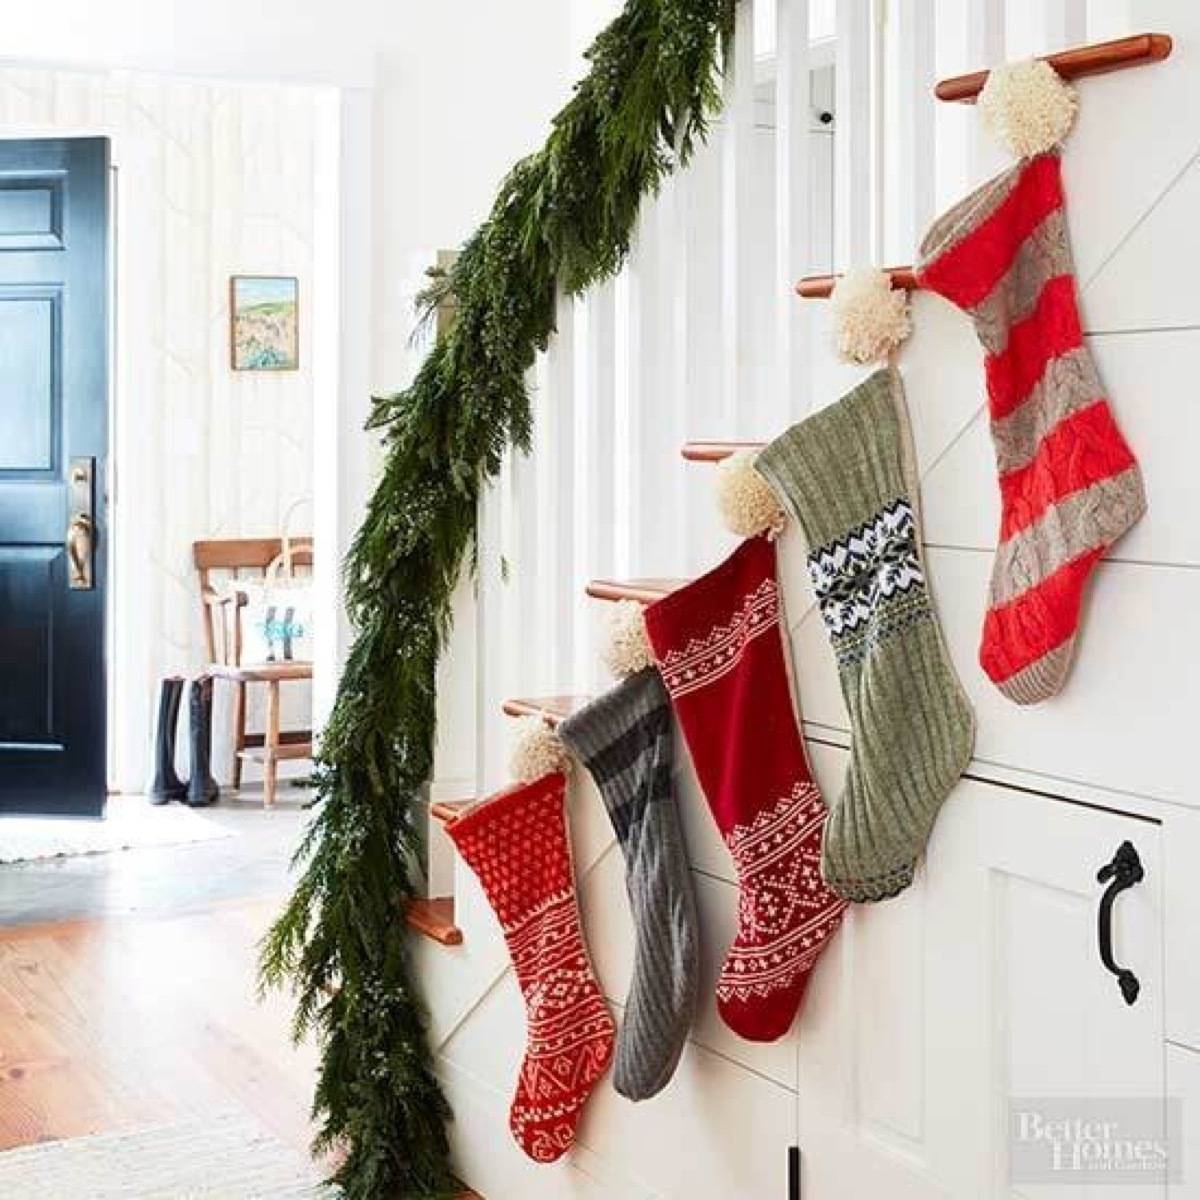 Christmas stockings on a stairwell